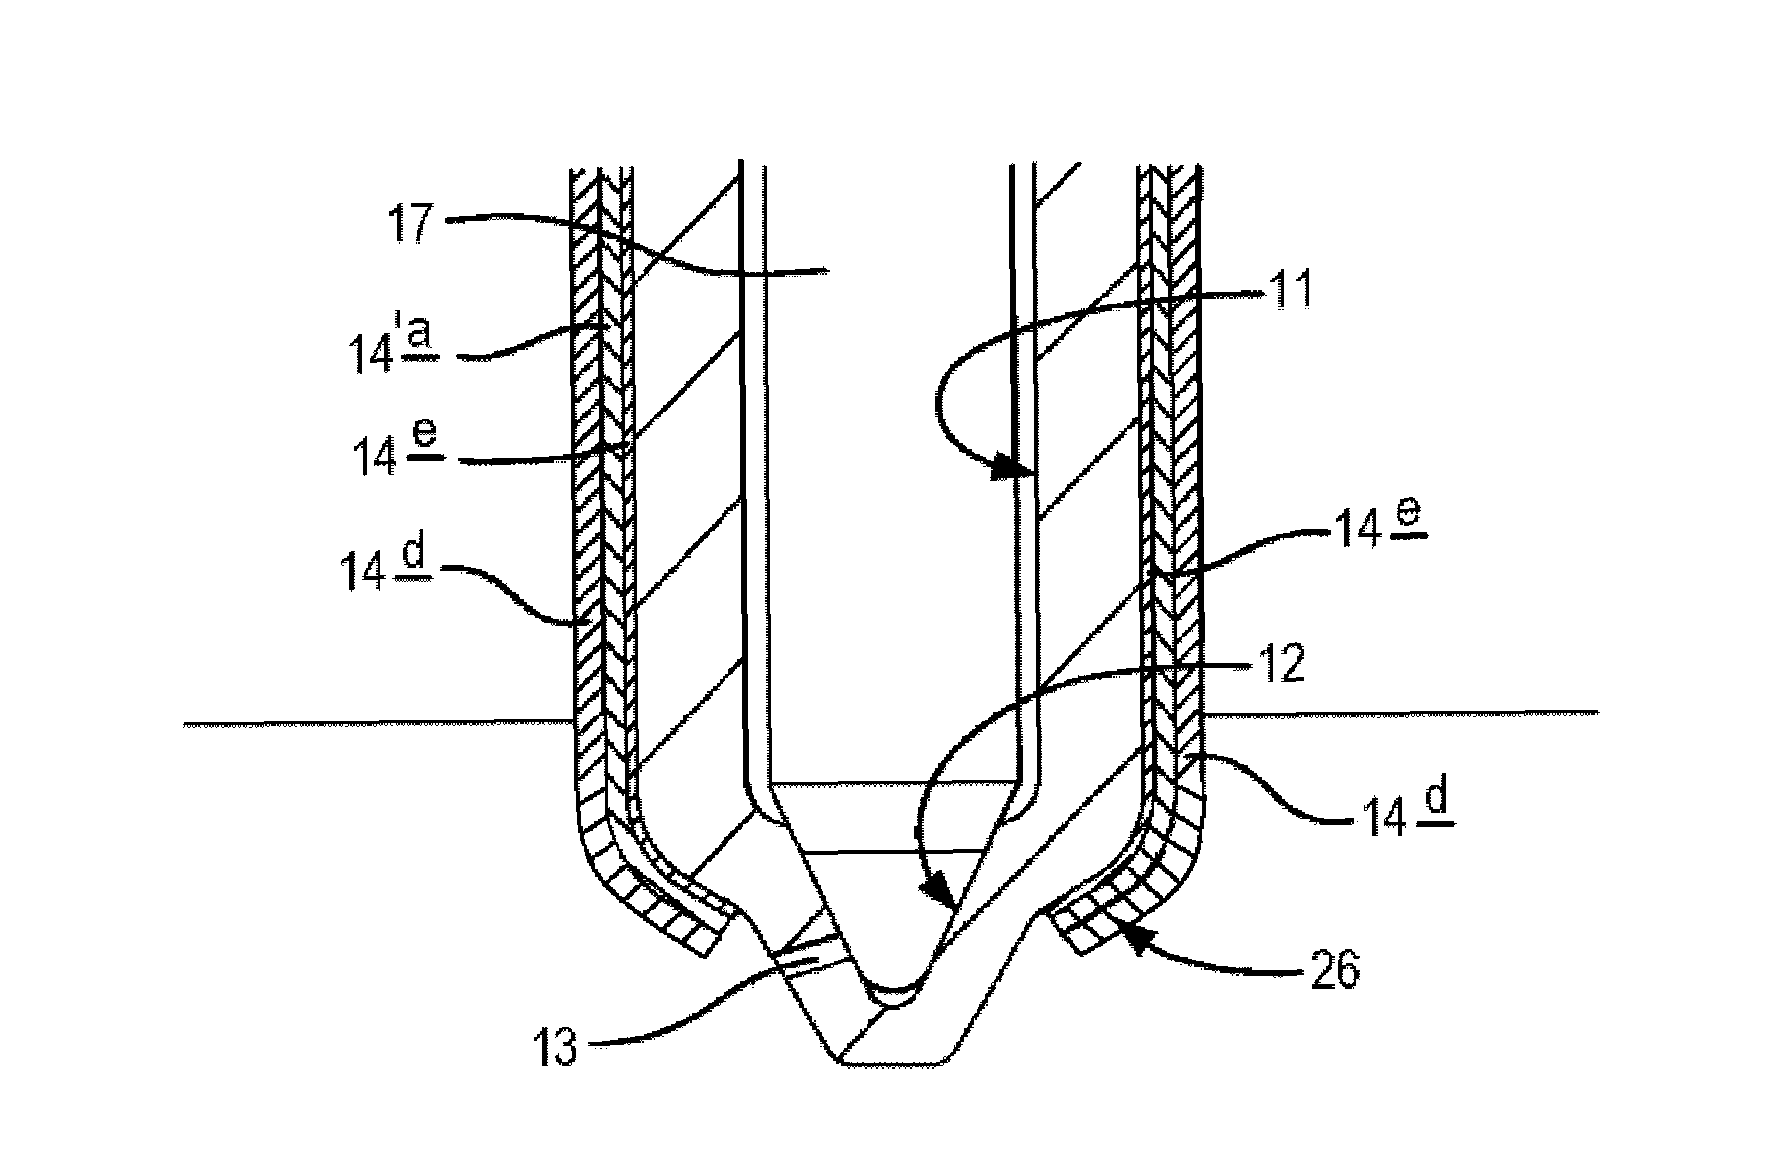 Injection nozzle